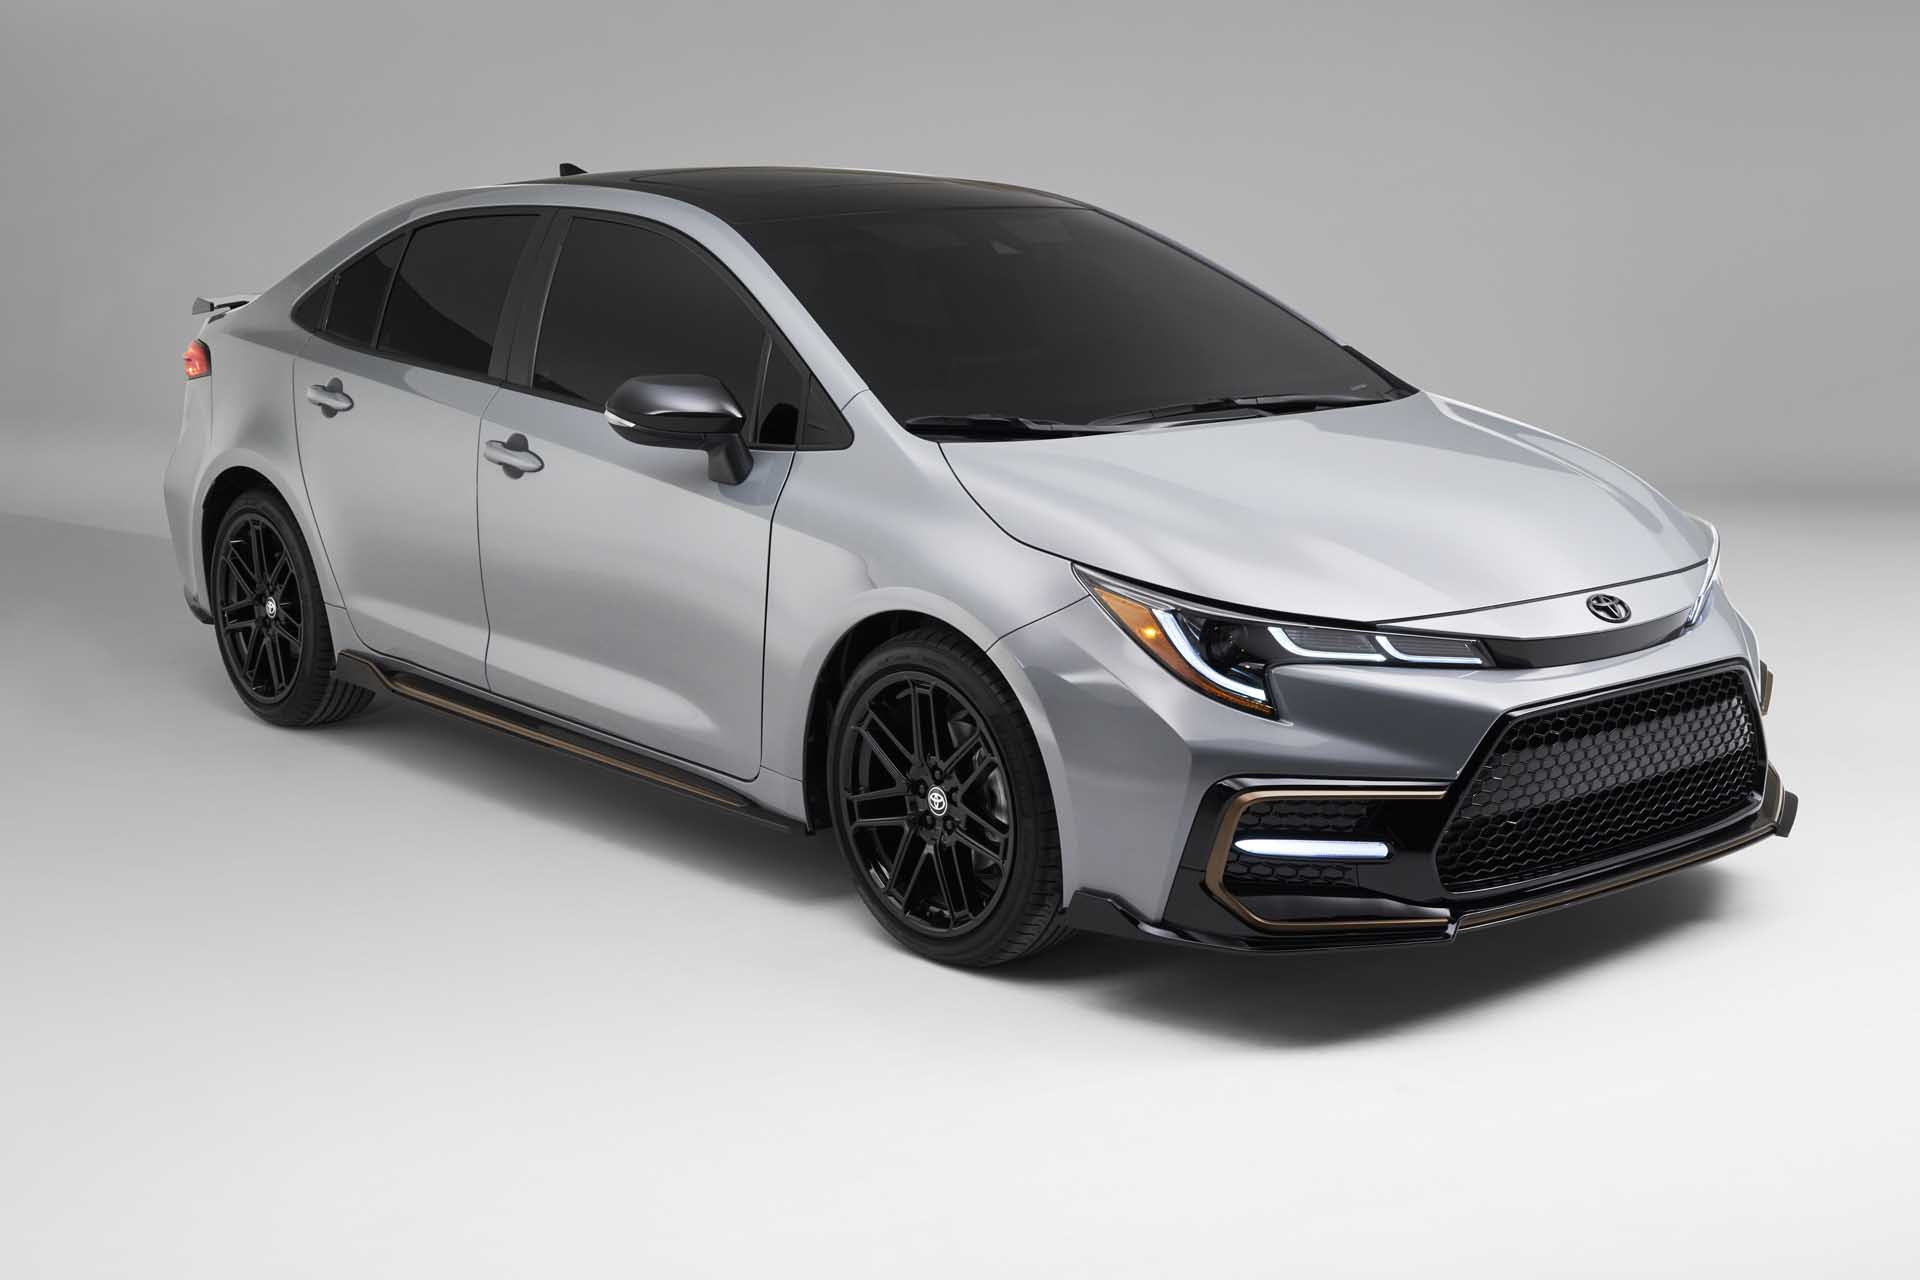 New And Used Toyota Corolla Prices Photos Reviews Specs The Car Connection